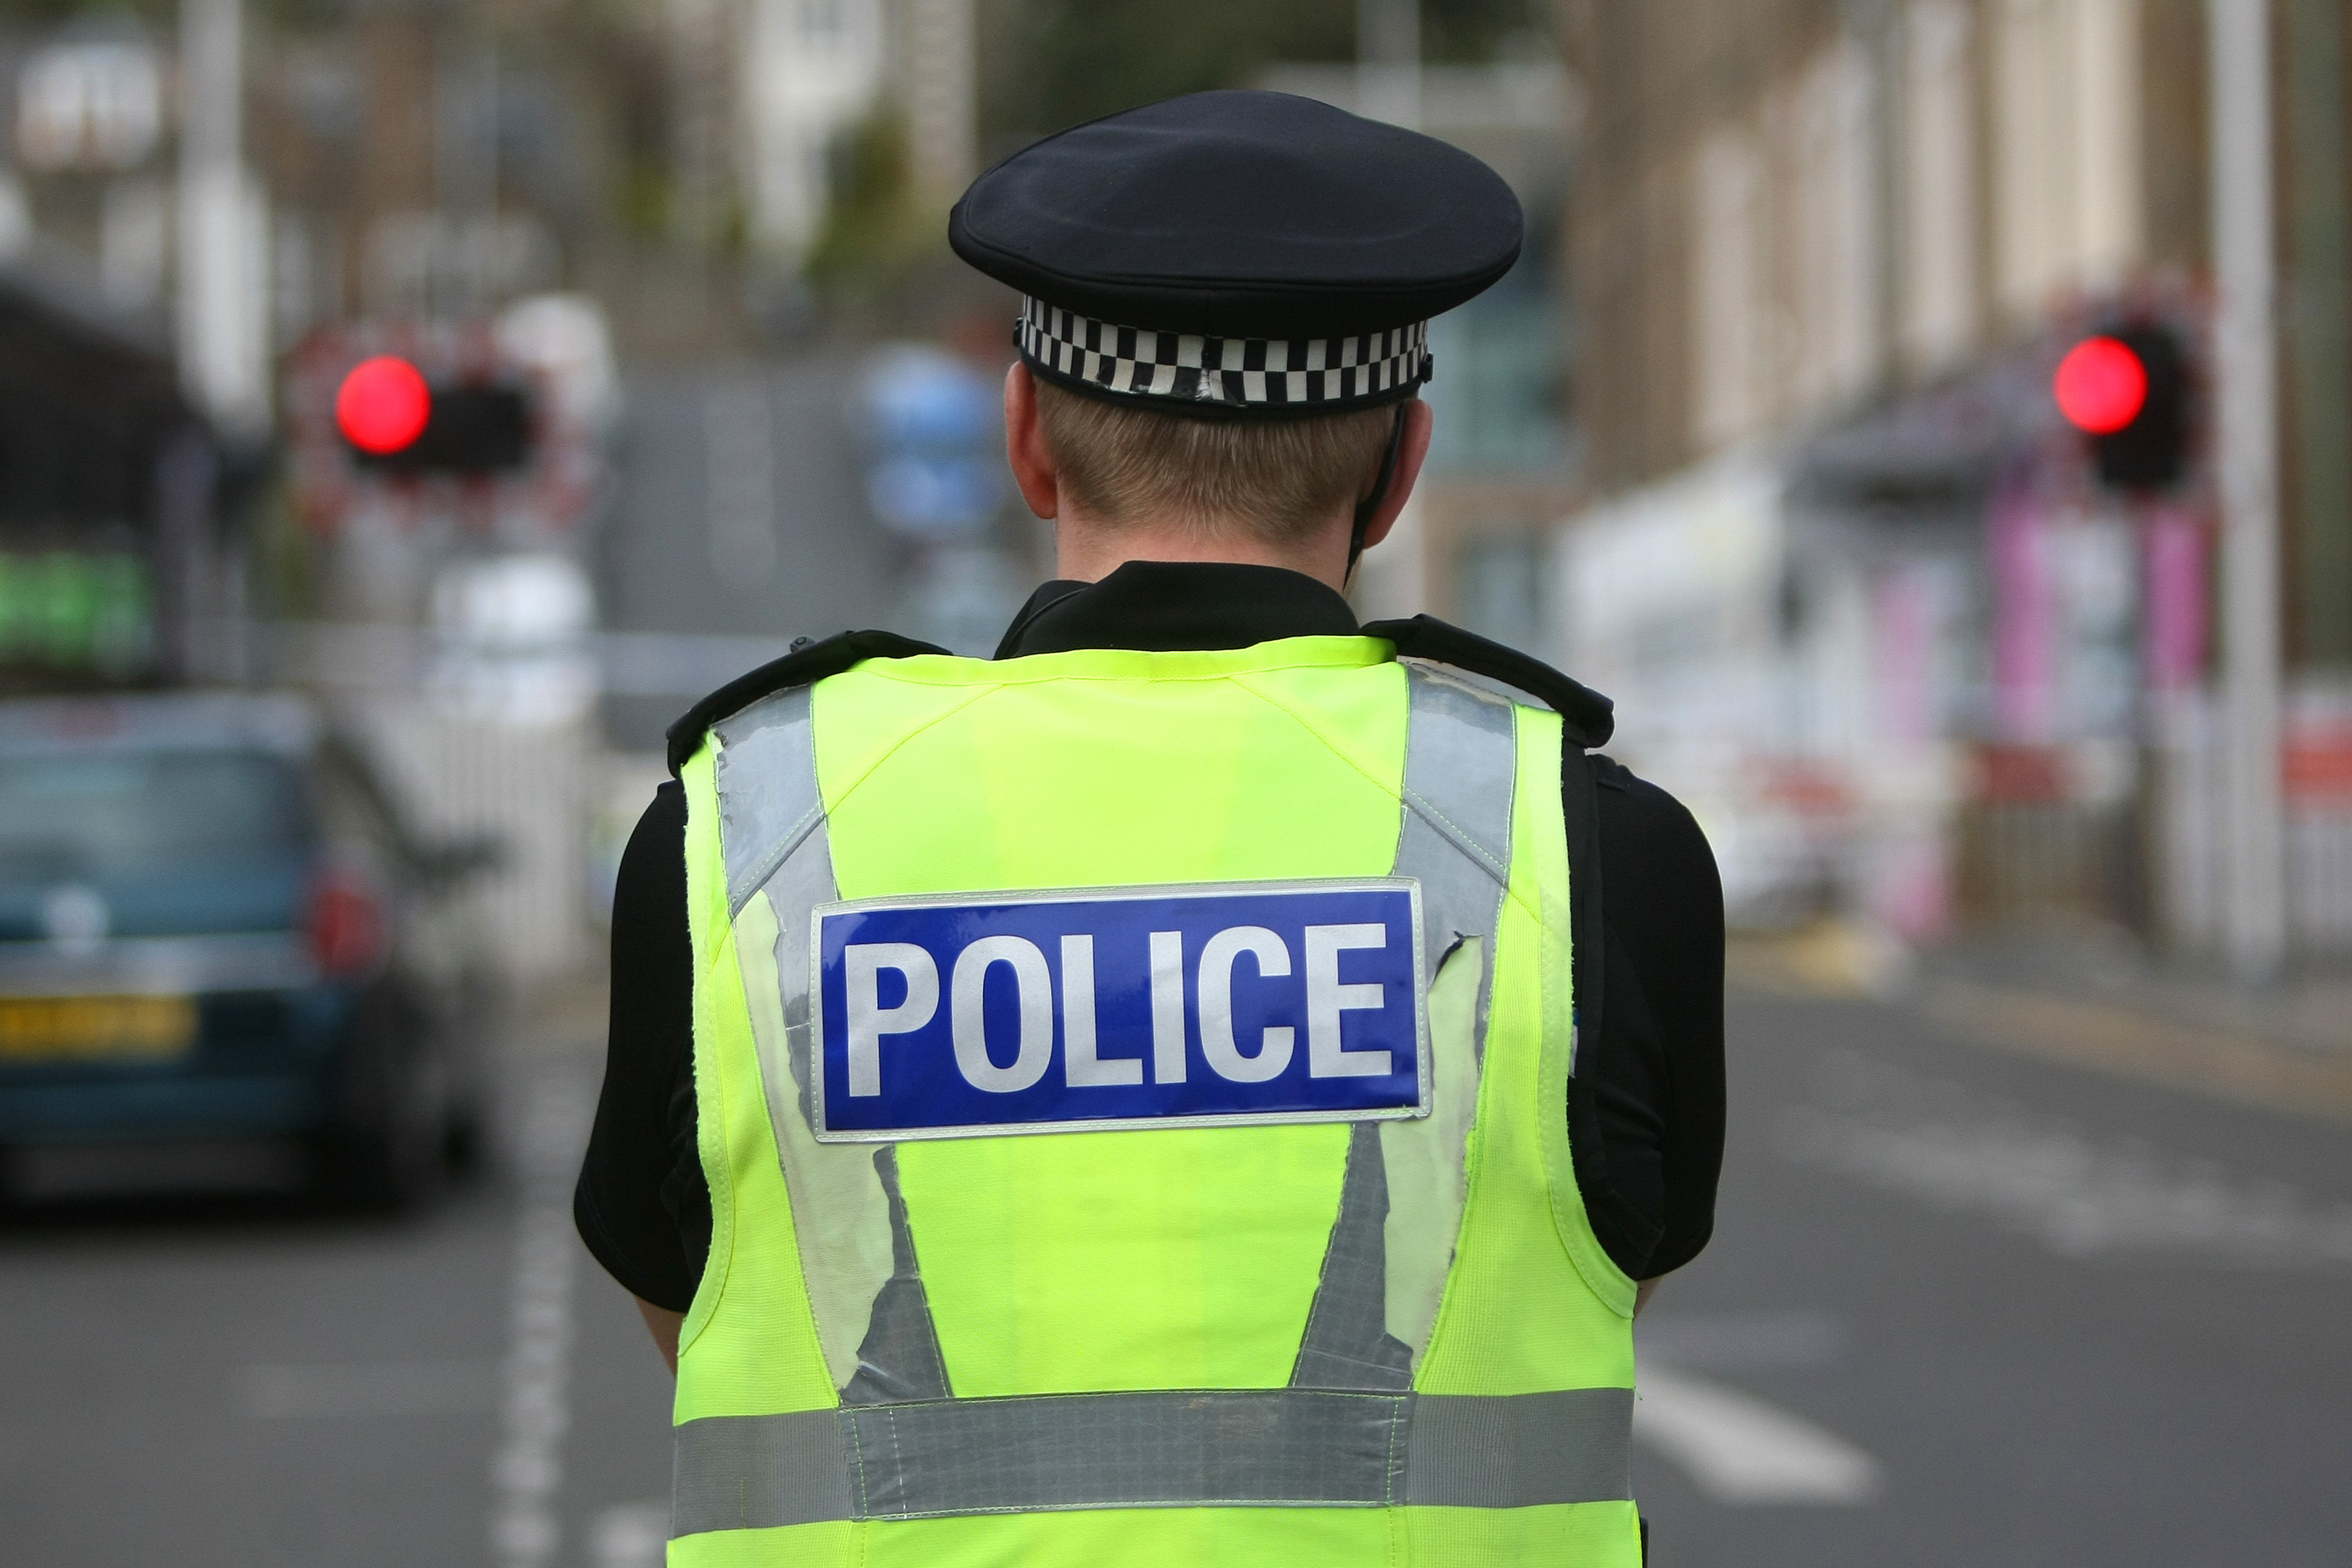 Officers can claim up to £1,250 – simply for doing their job (Kris Miller/DC Thomson)